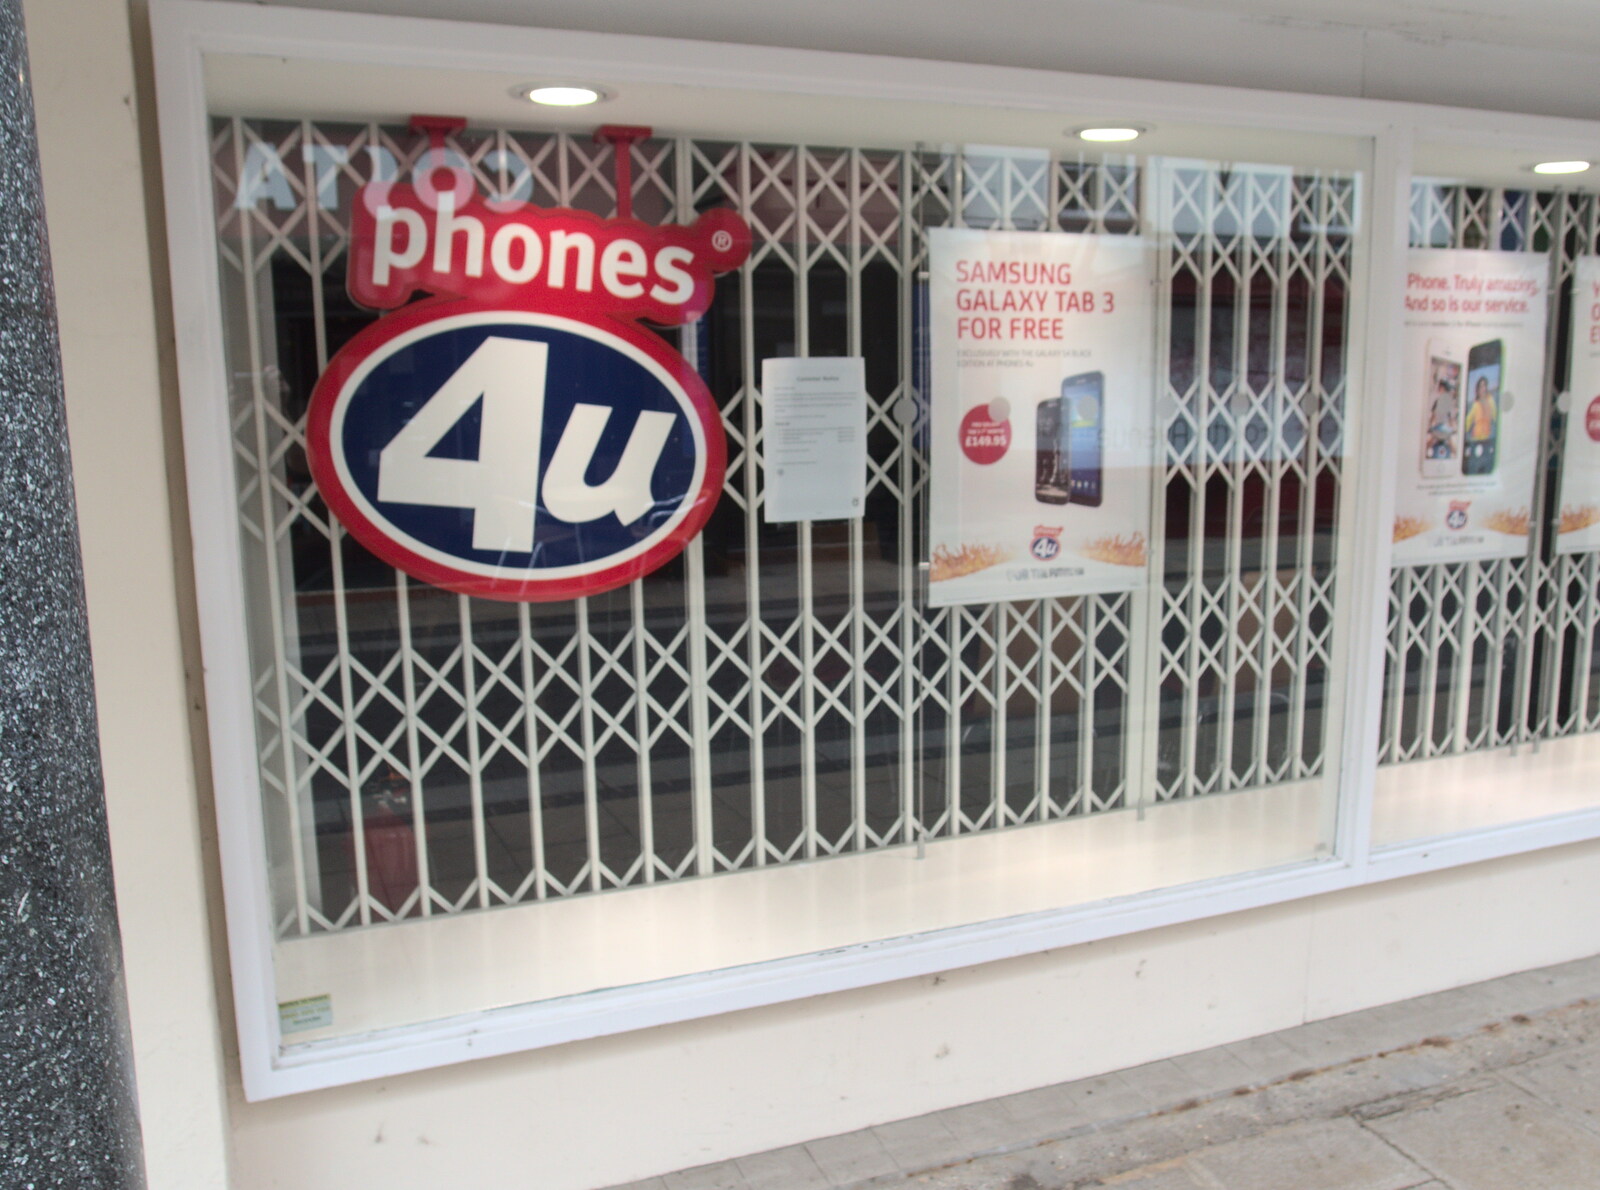 Phones 4U goes bust and closes down from A House Built of Wax and Diss Randomness, Southwark Street, London - 30th September 2014